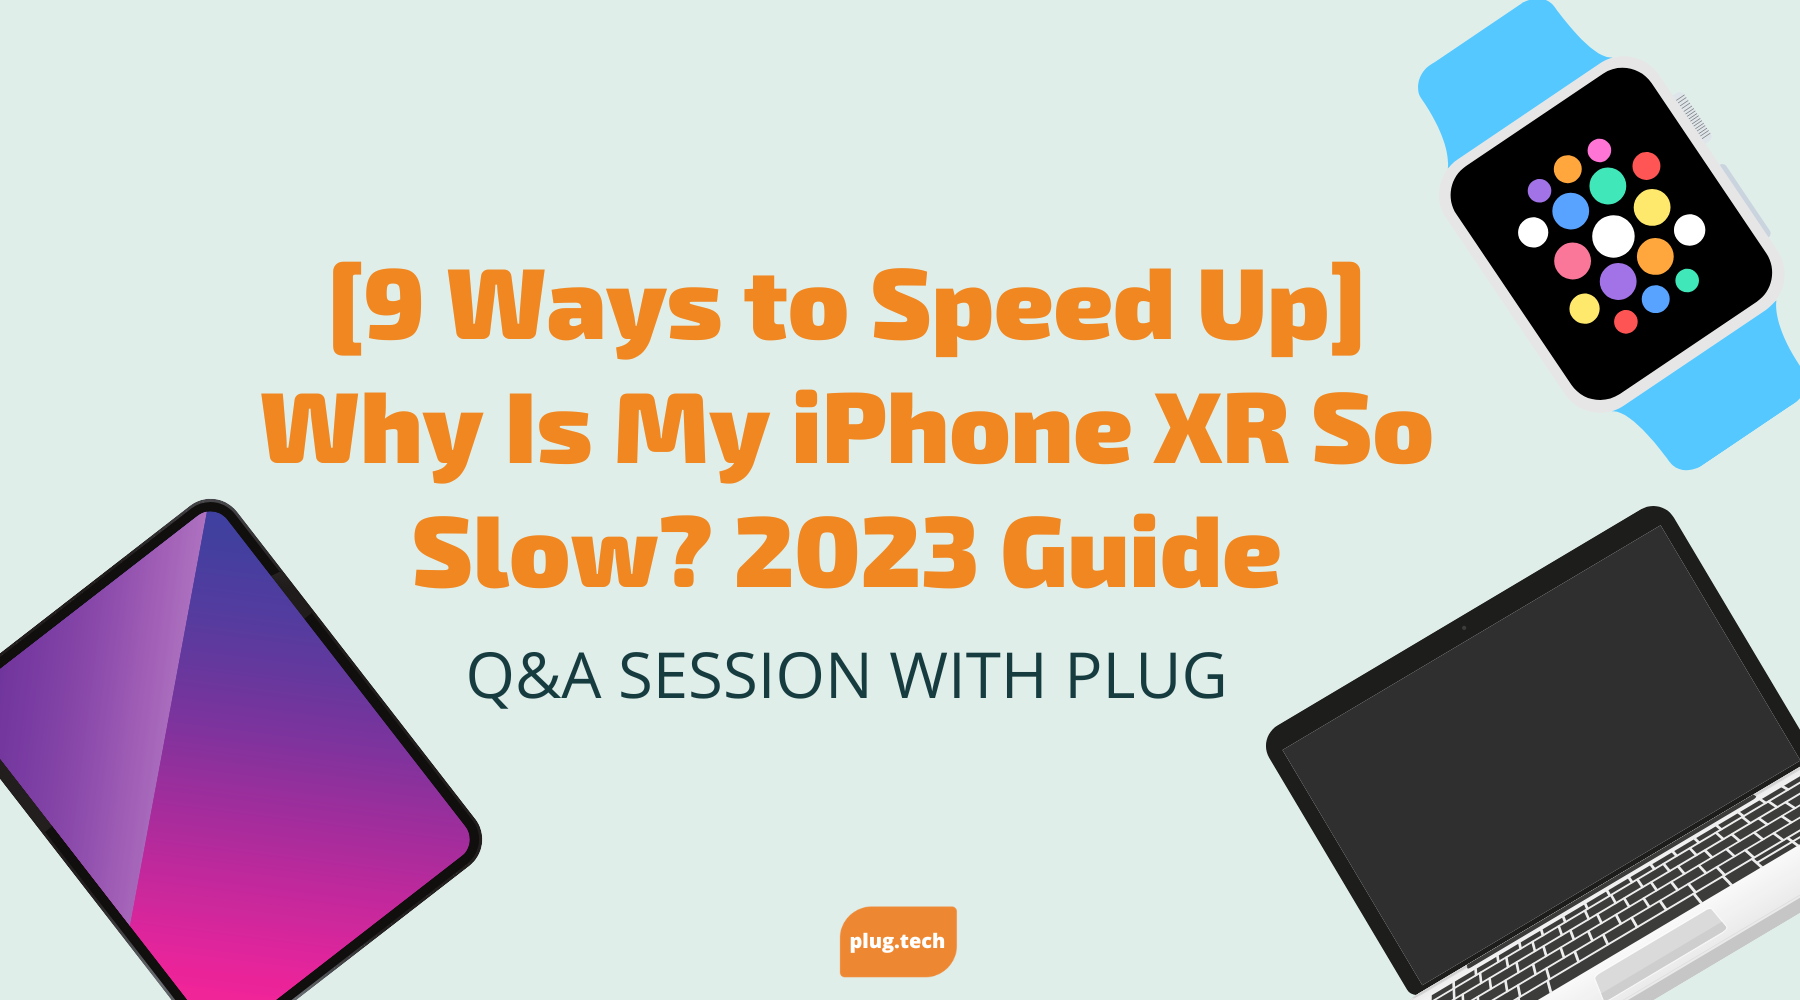 [9 Ways to Speed Up] Why Is My iPhone XR So Slow? 2023 Guide